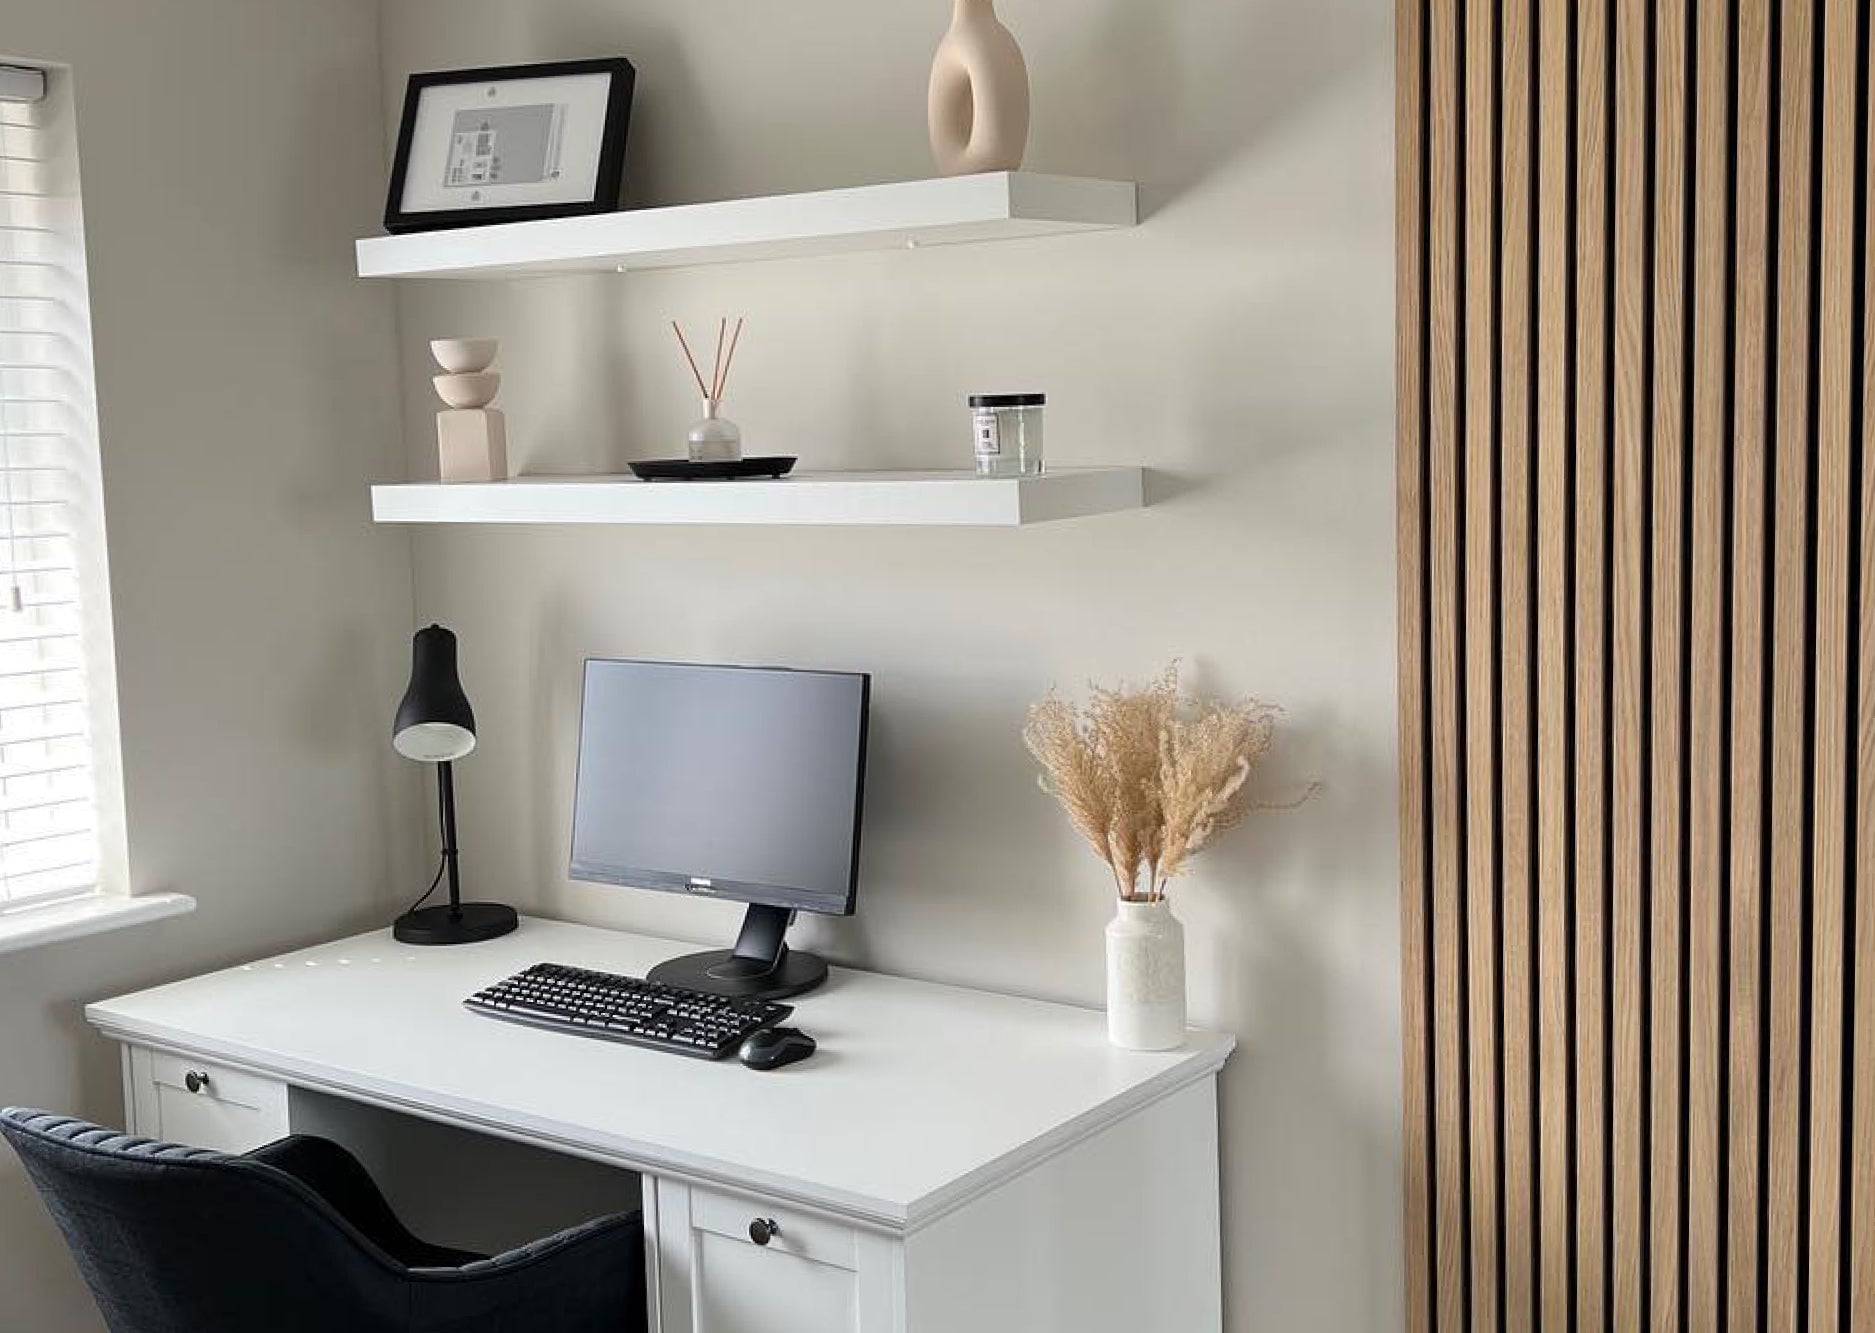 Work from home office space. White desk with white shelves above. Naturewall Slatwall panel on the wall to the right.